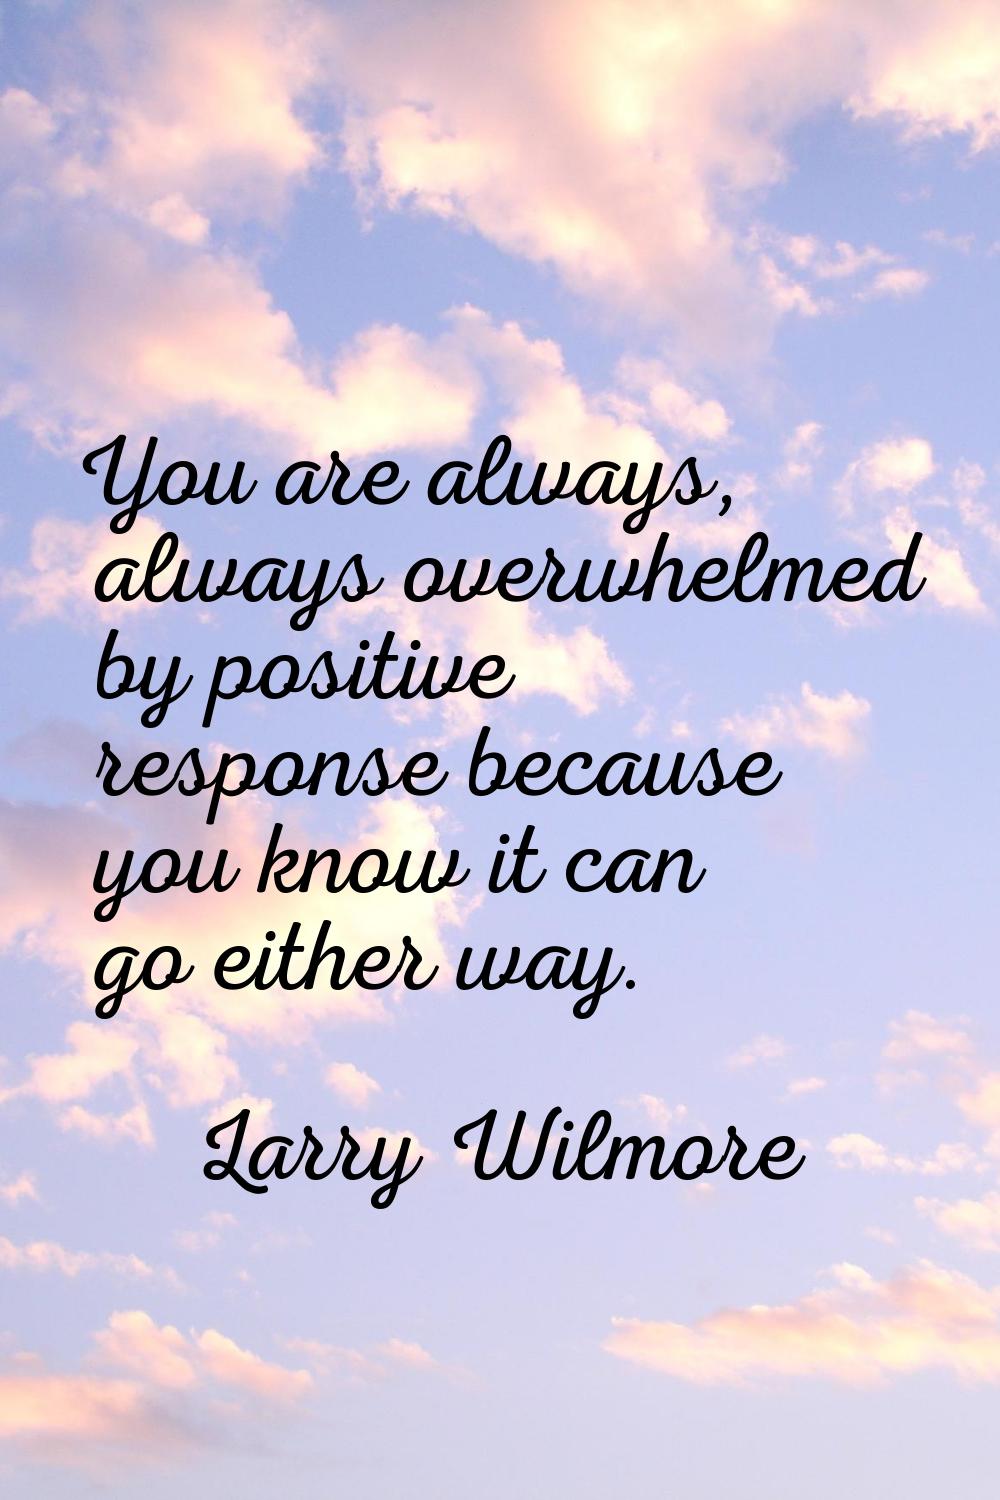 You are always, always overwhelmed by positive response because you know it can go either way.